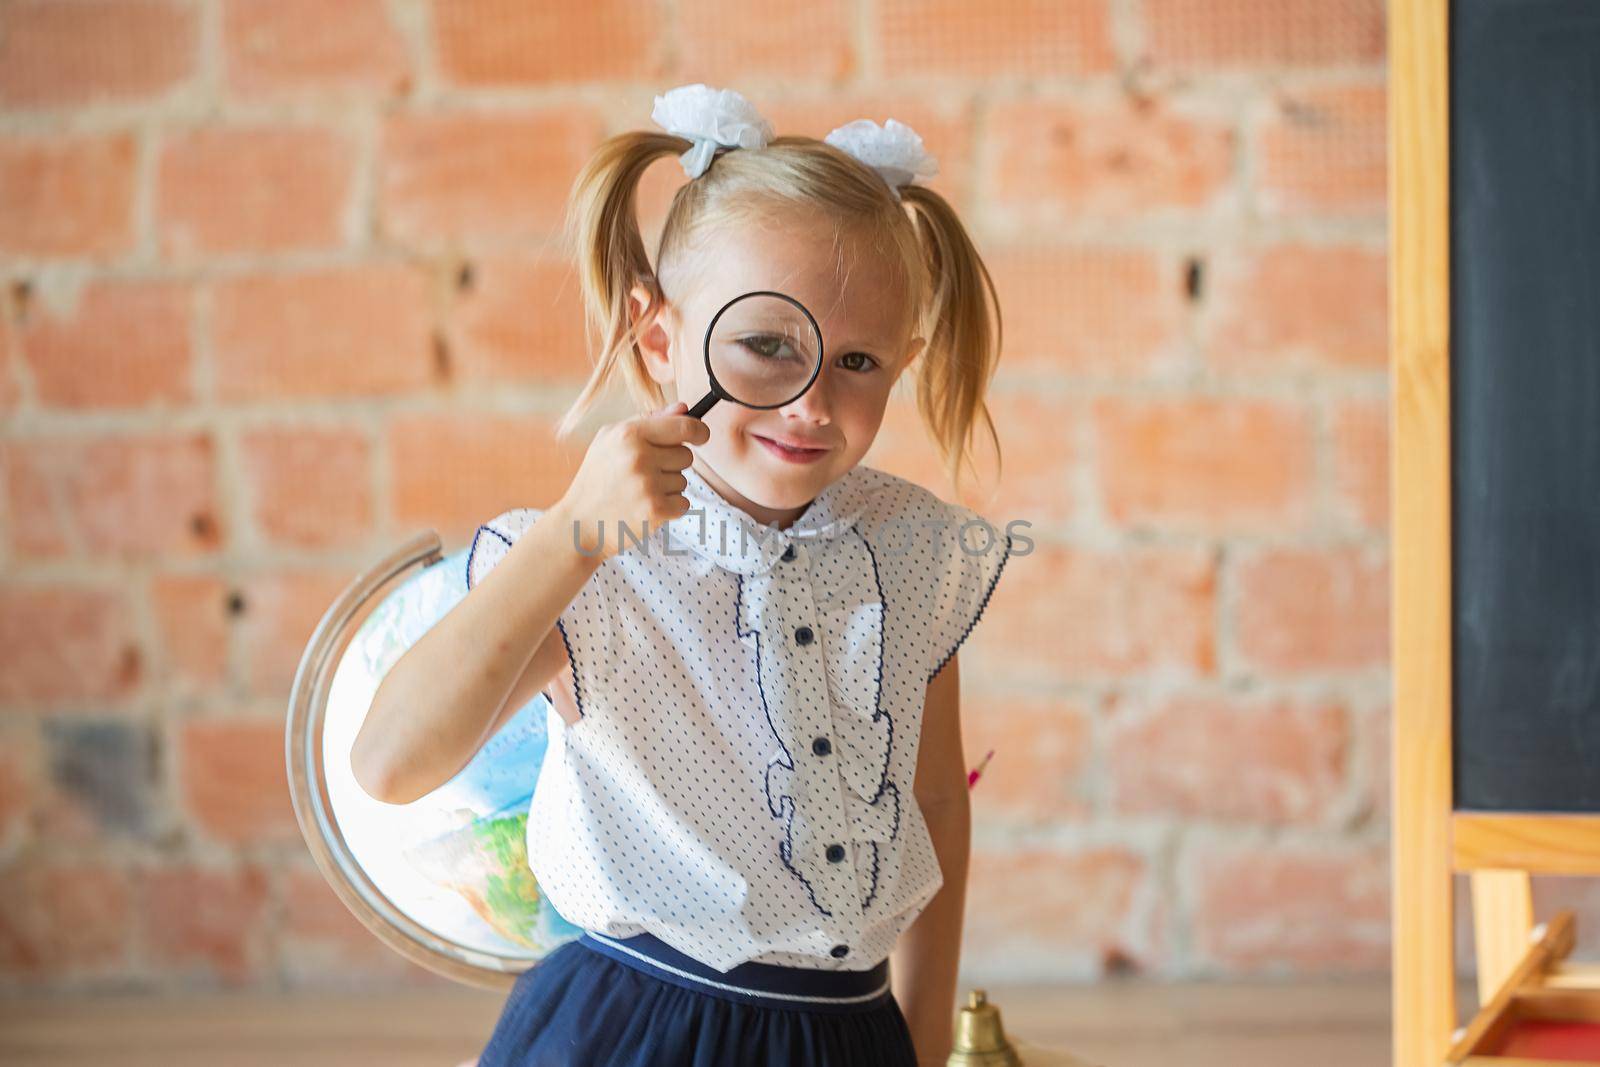 Adorable private school kindergarten girl with magnifier if front of her eye by galinasharapova